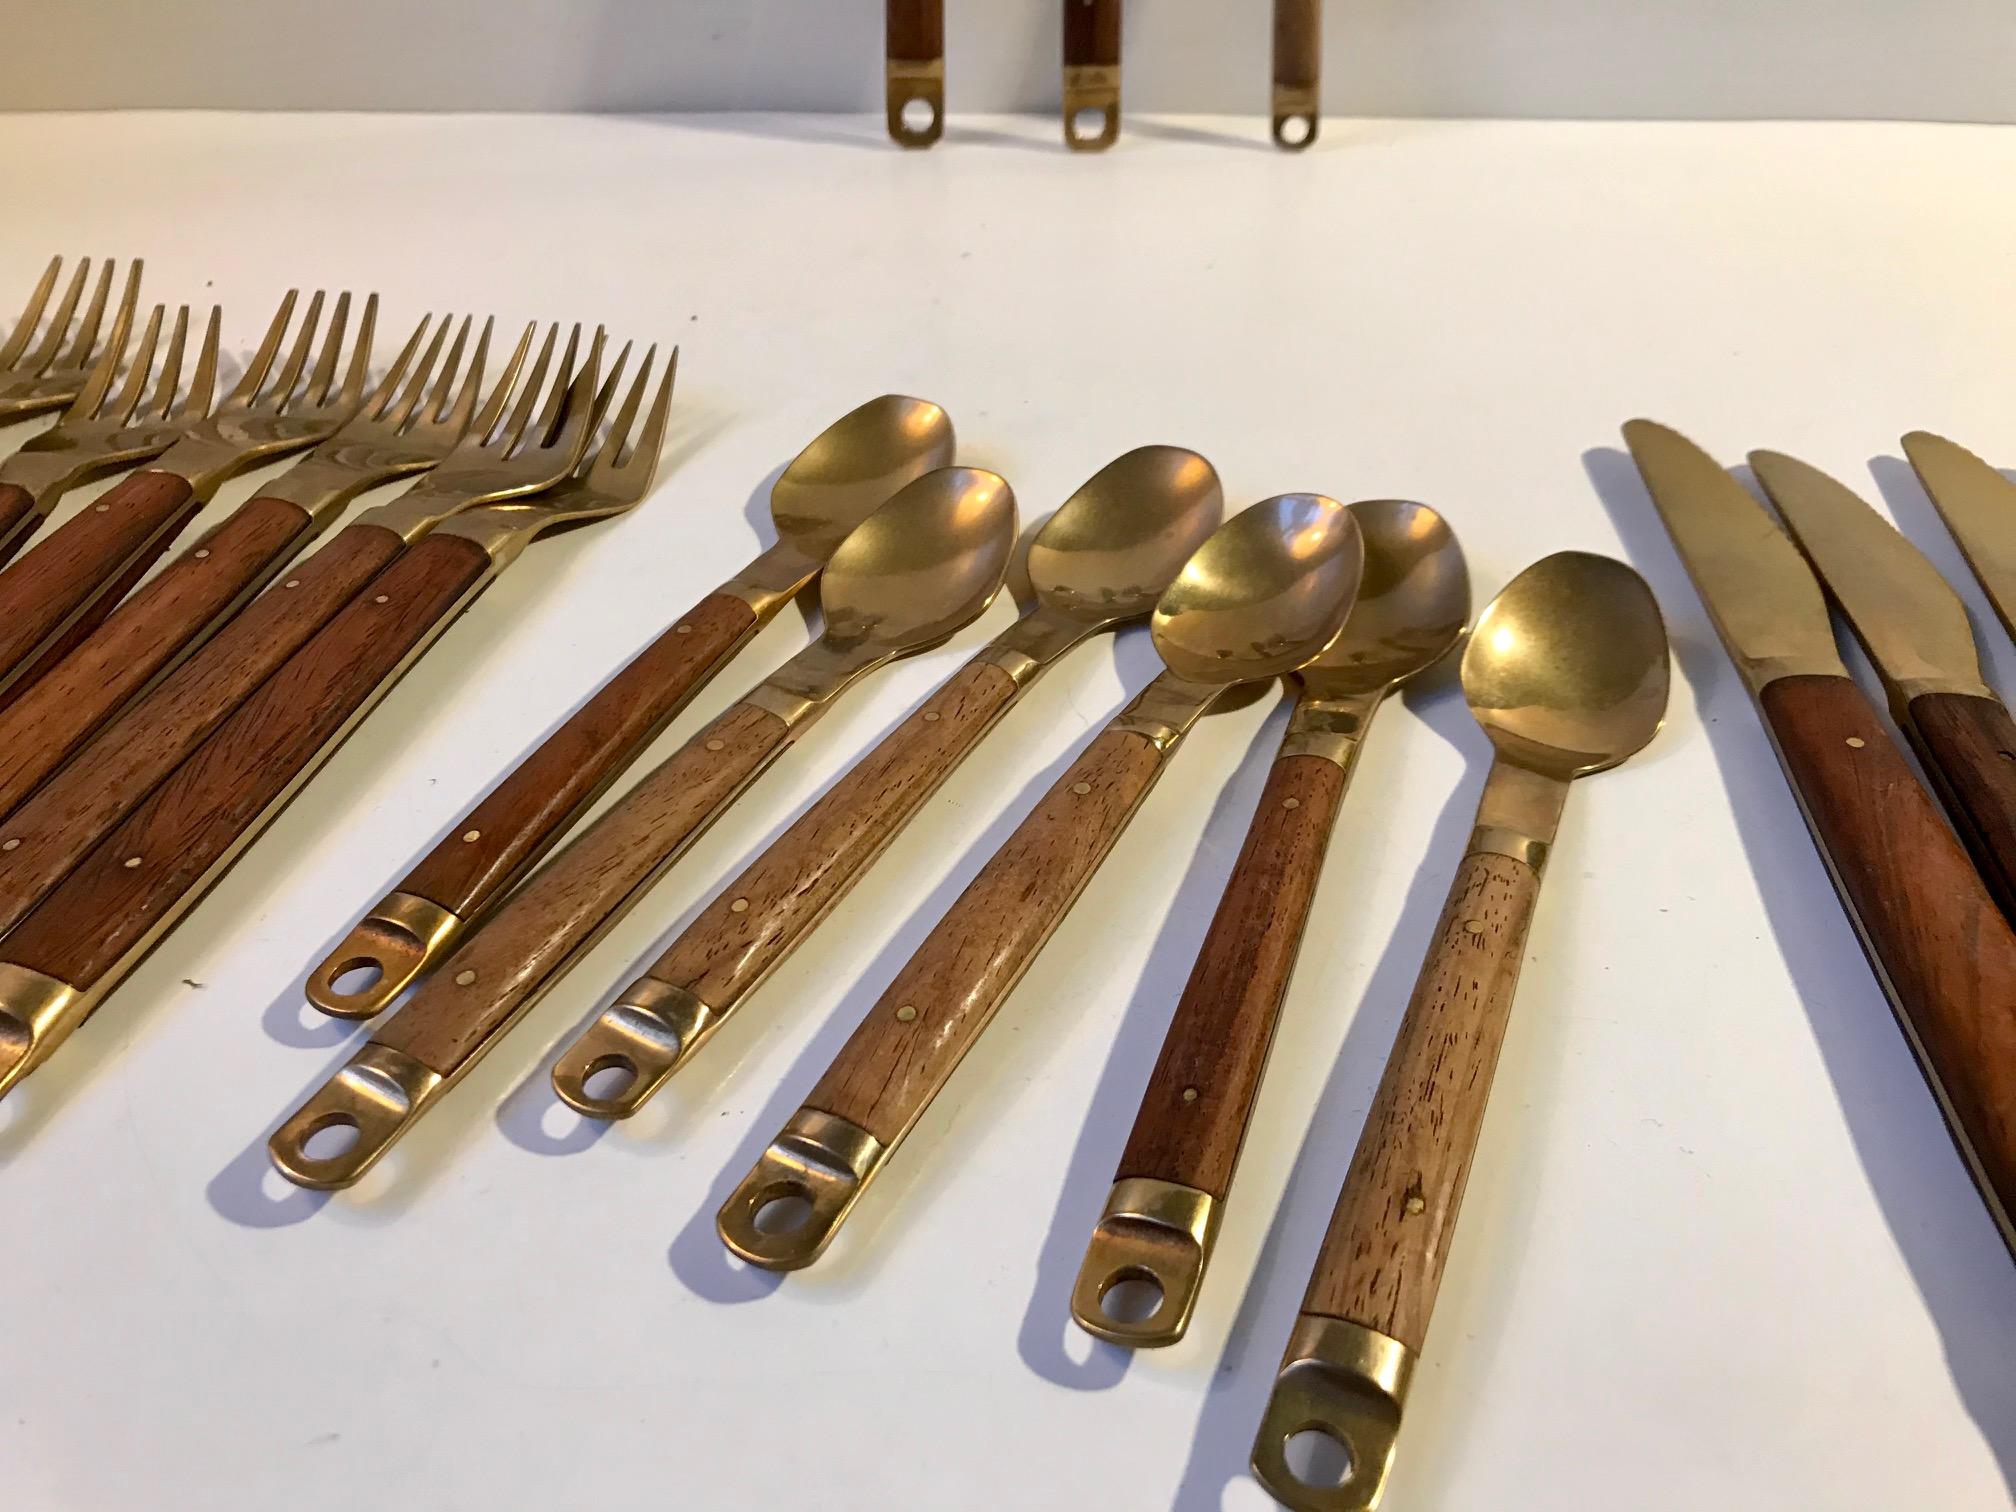 Mid-20th Century Danish Modern Brass and Teak Cutlery Set from Carl Cohr, 1960s For Sale